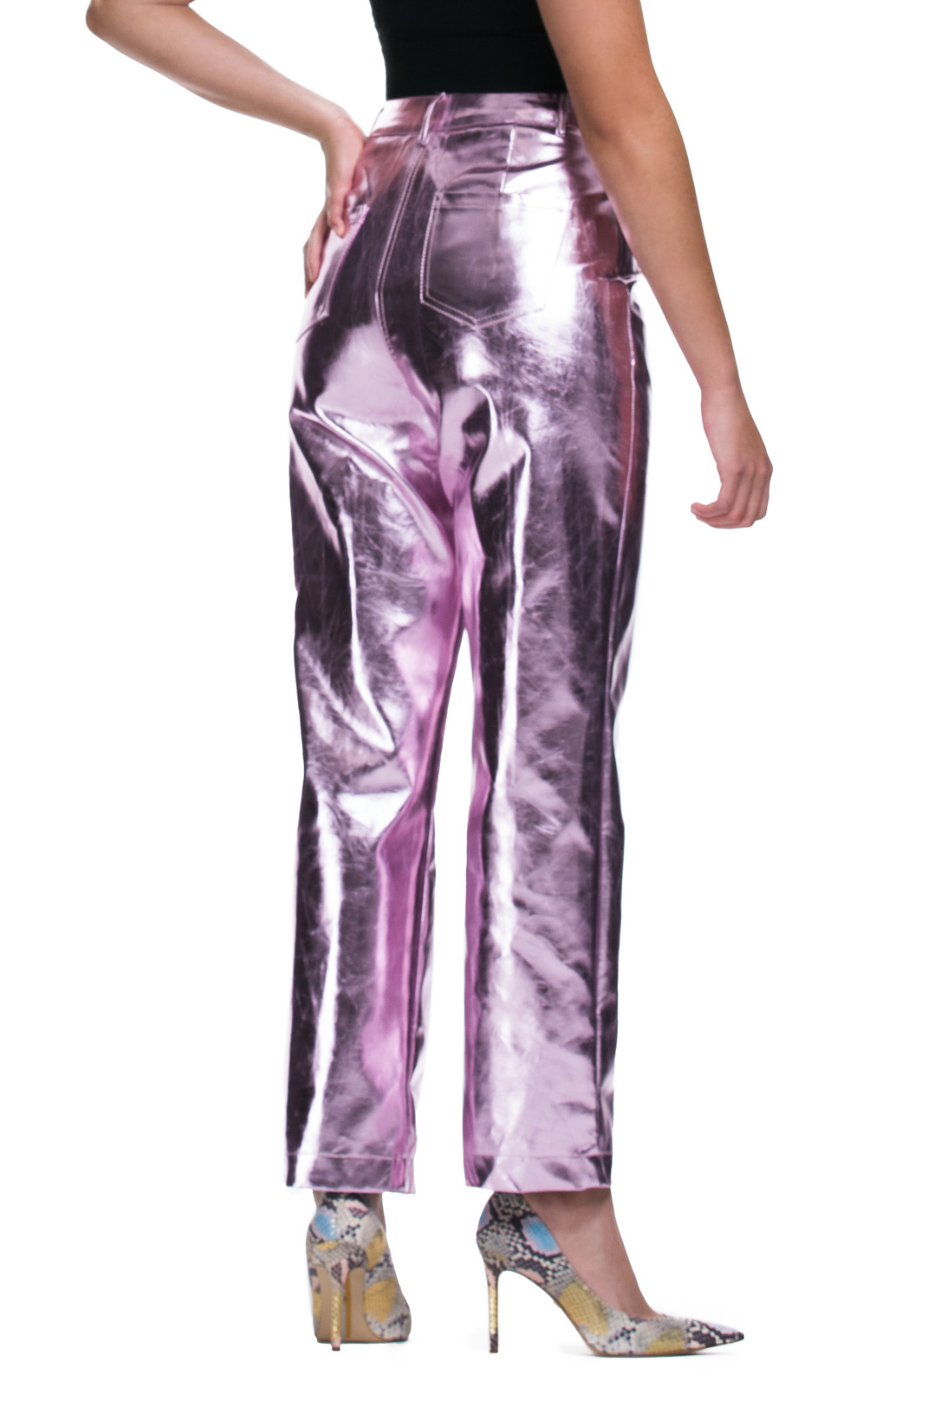 Lupe Pale Pink Metallic Trousers - Expressive Collective CO.